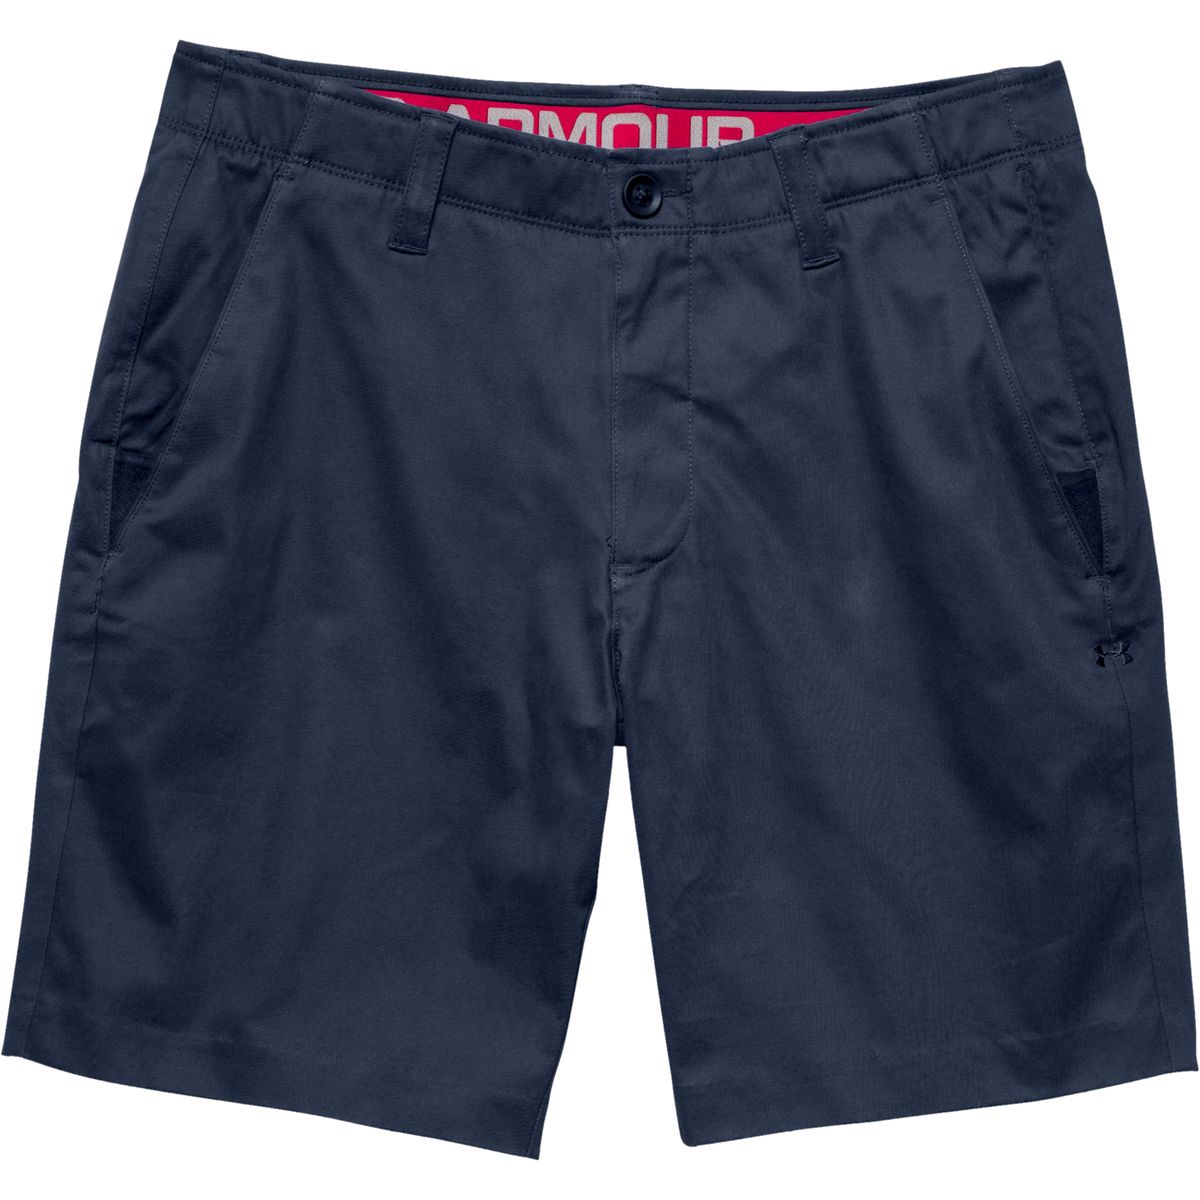 Teller Performance Evaluations E Amples: Performance Chino